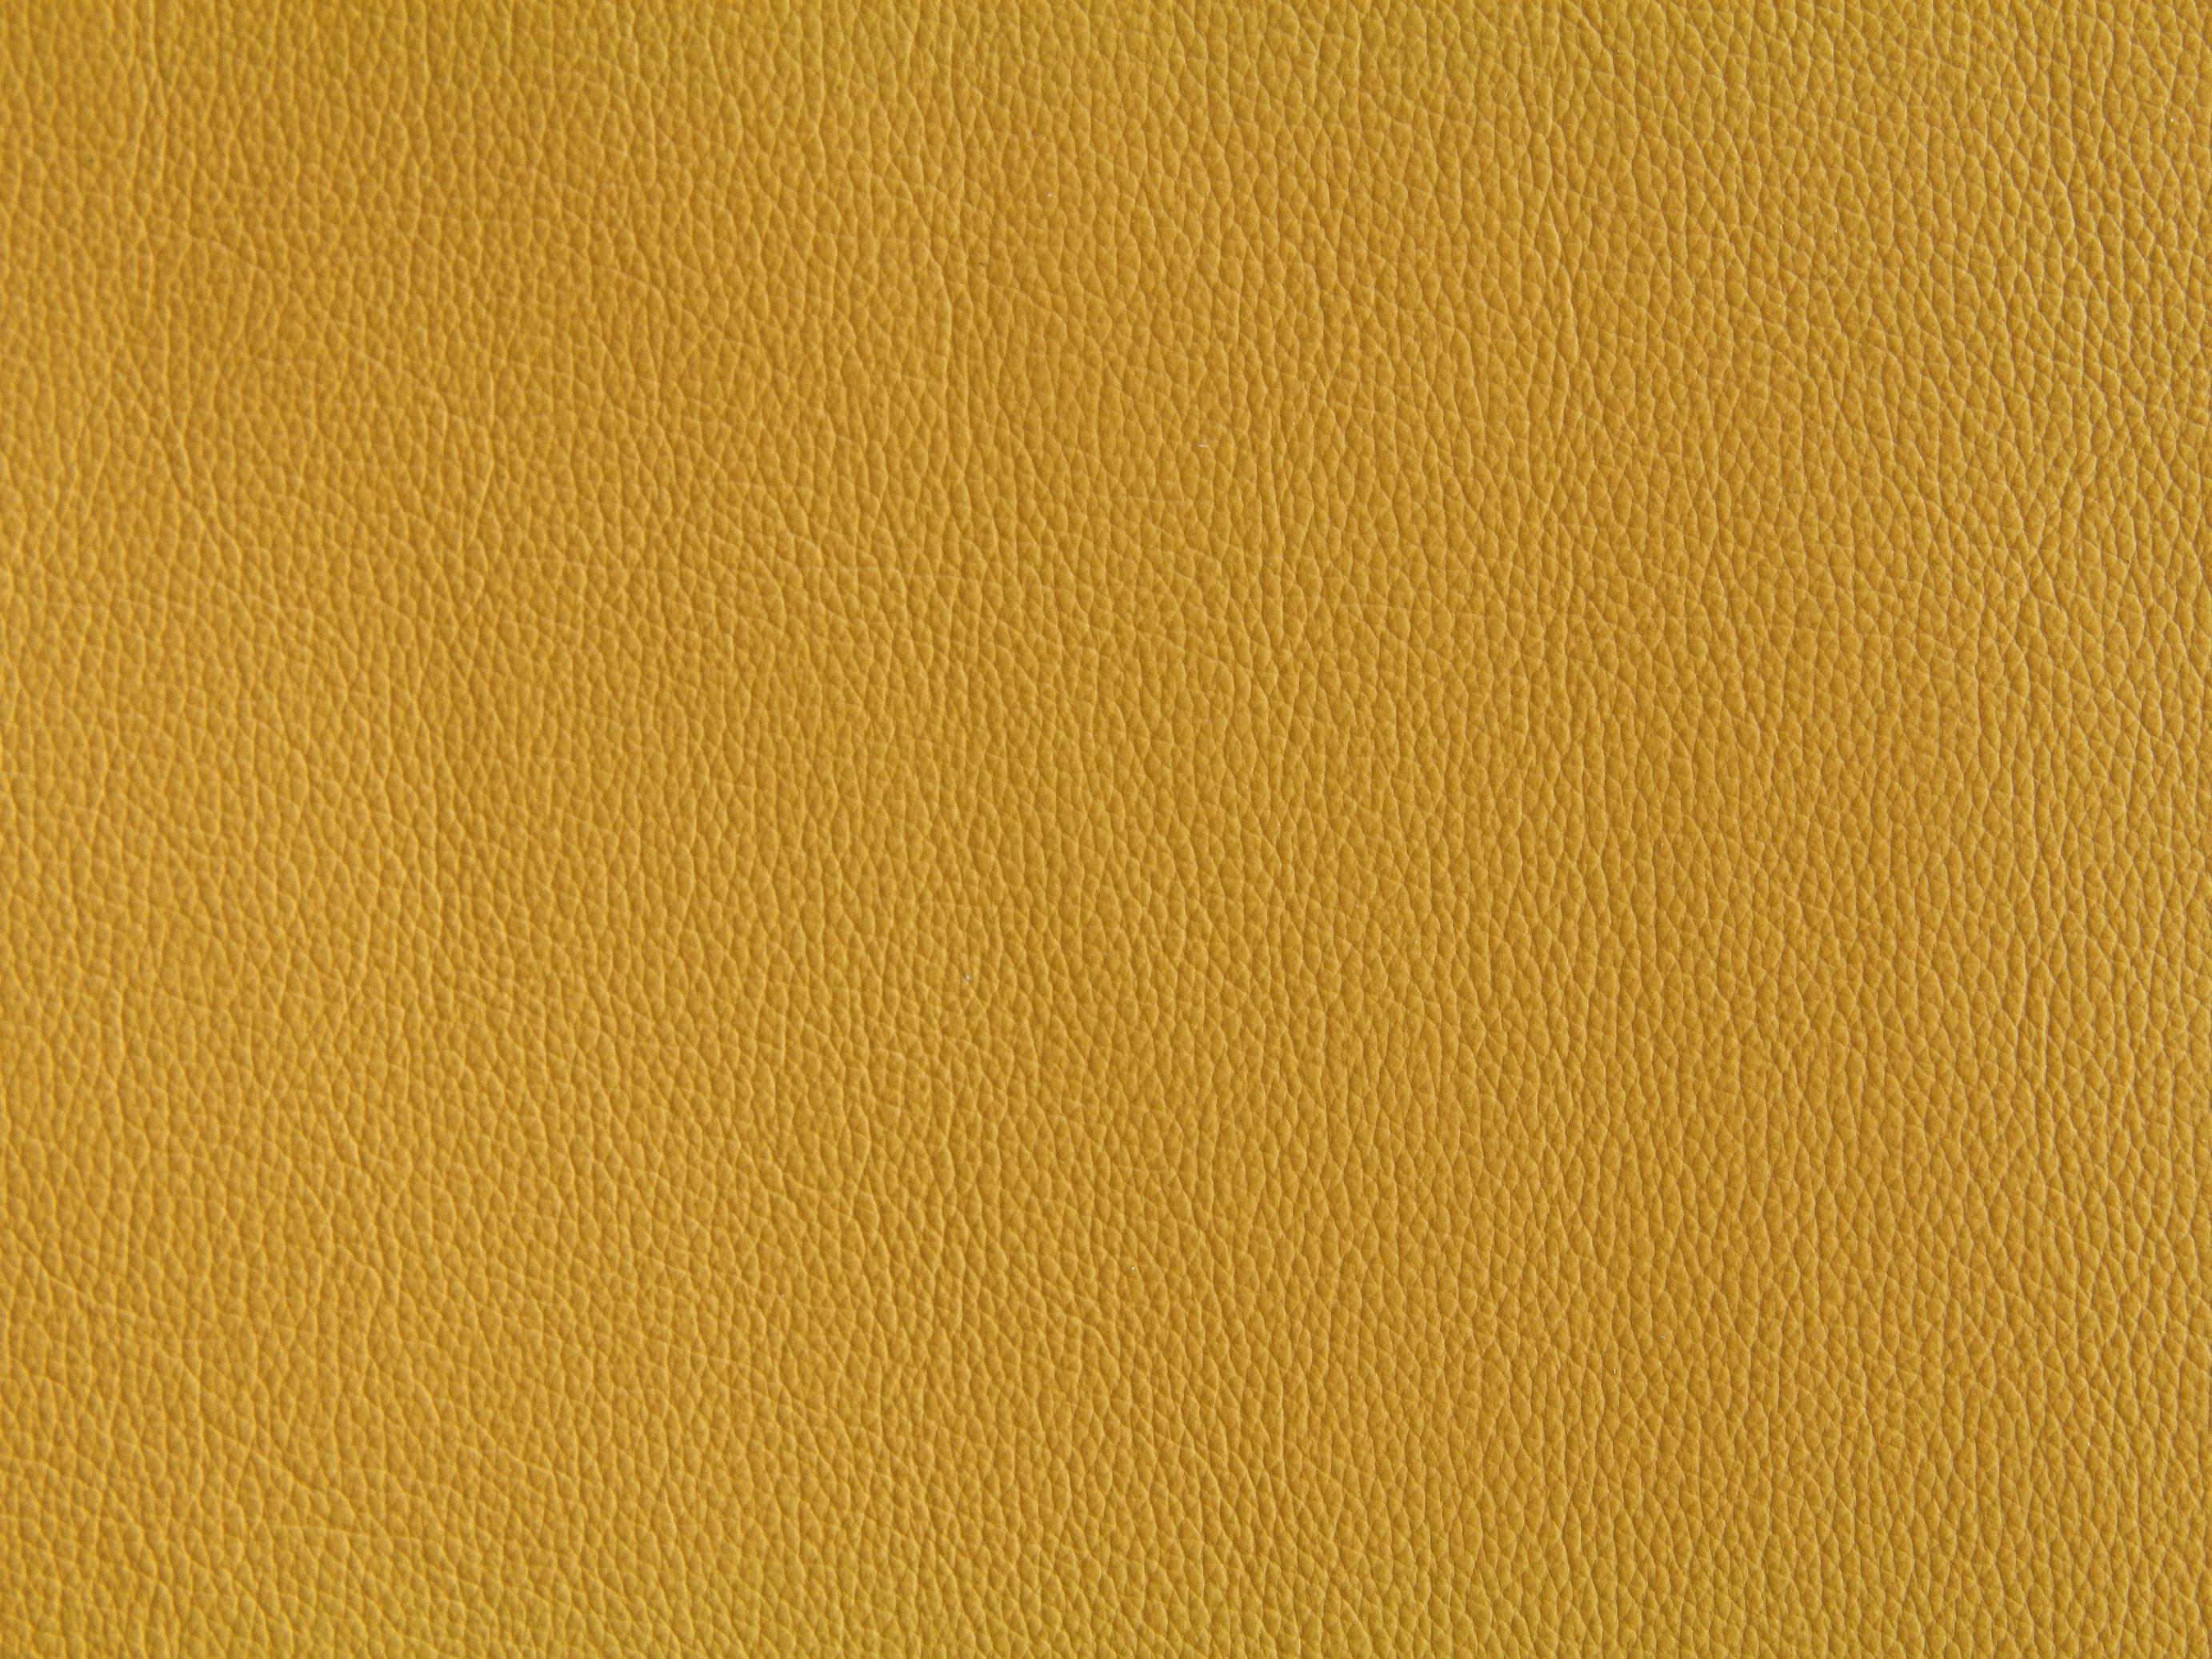 yellow-leather-texture-wallpaper-fabric-material-design-bright-stock-photo.jpg